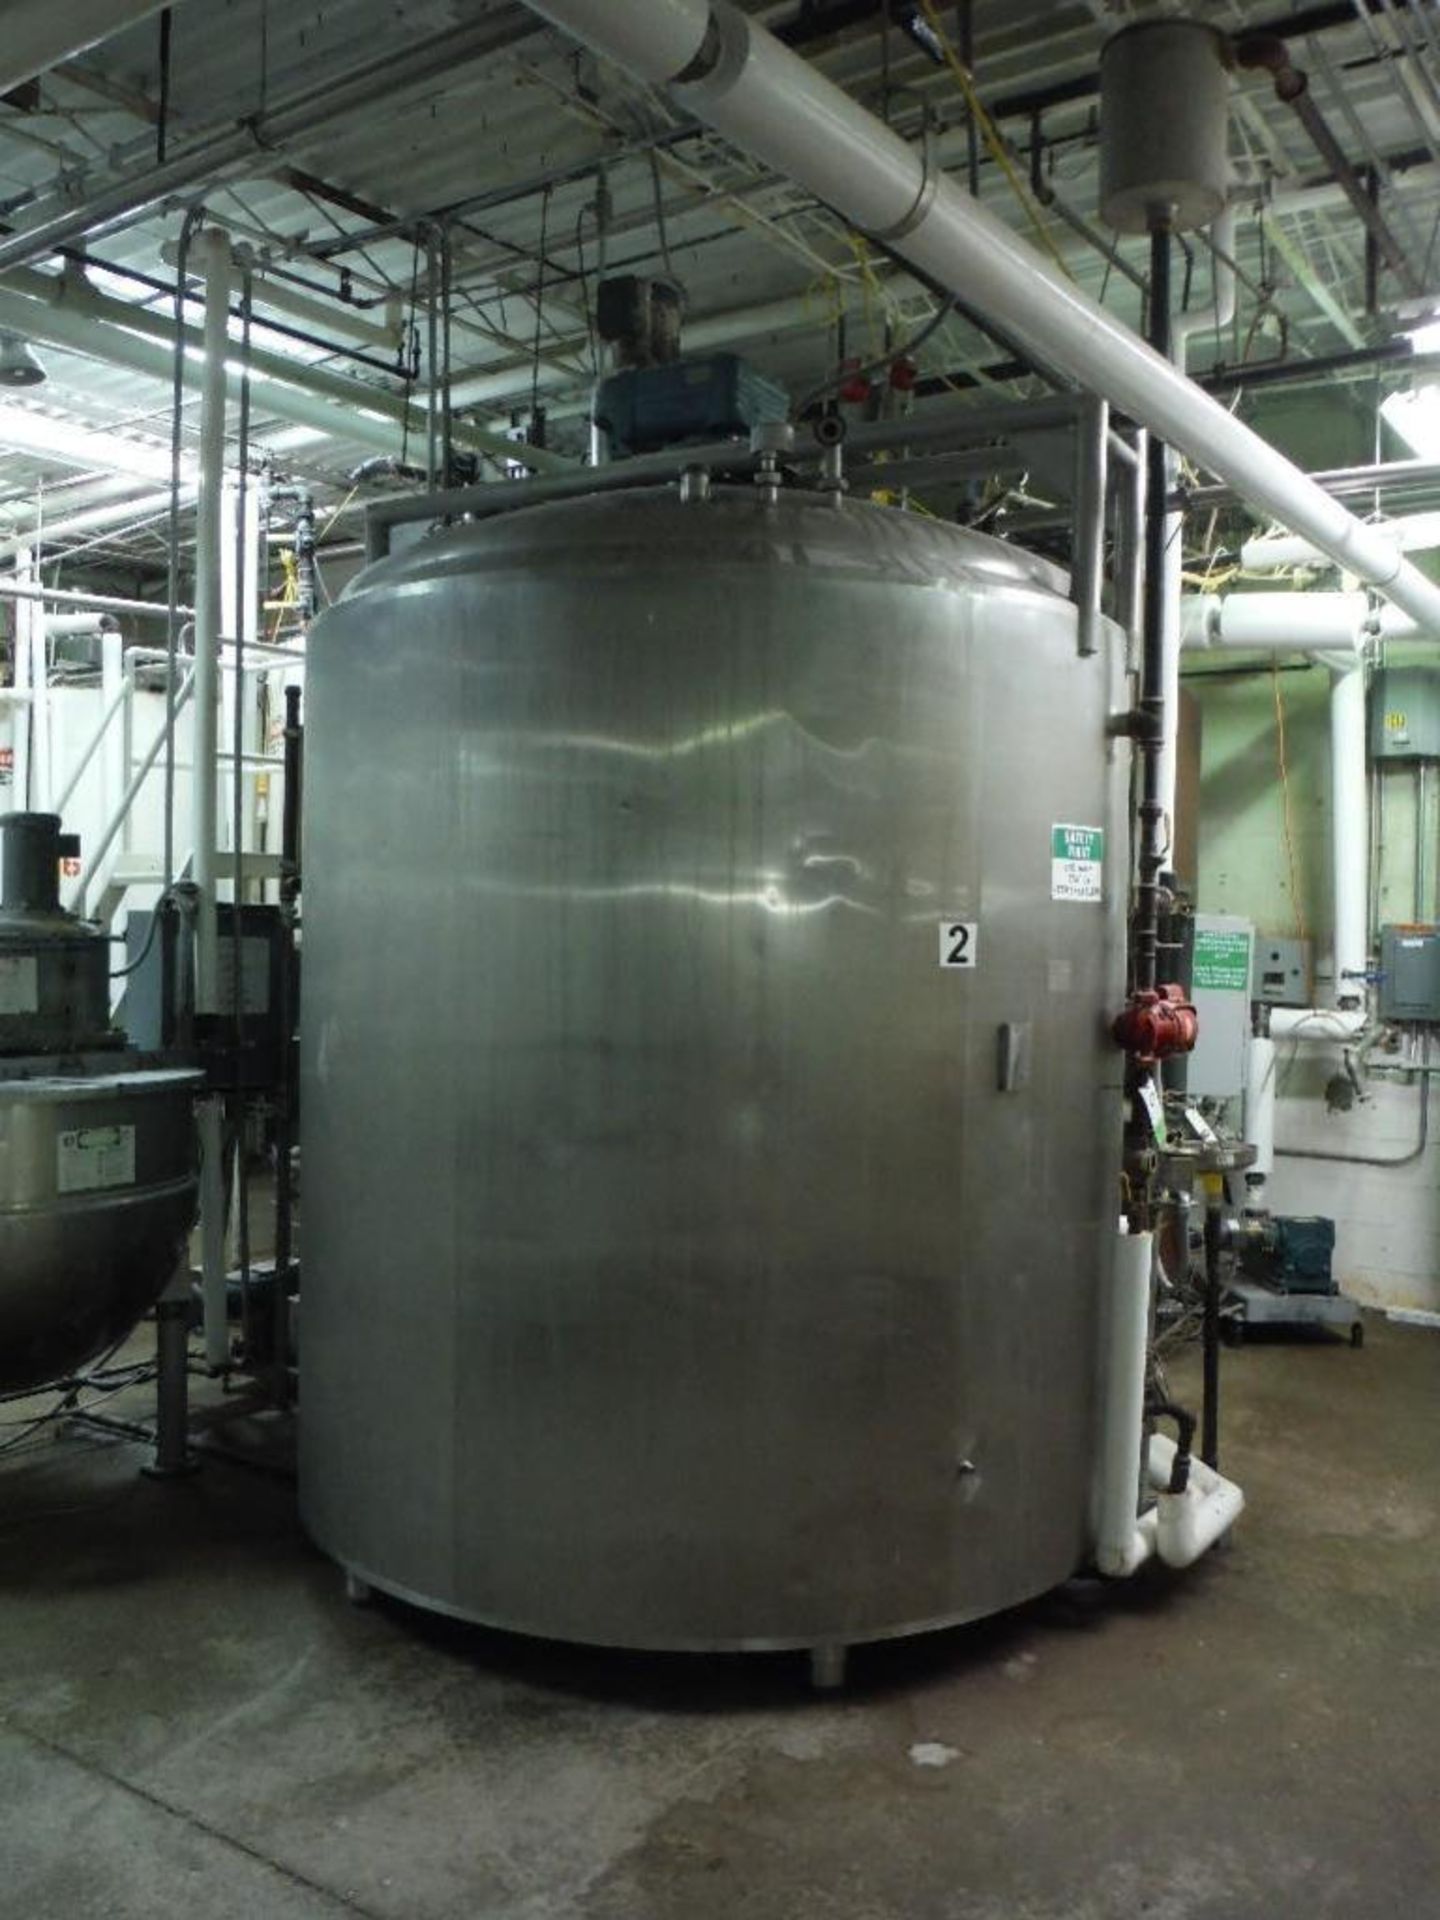 Crepaco SS jacketed tank, SN D 2858, 90 in. dia x 100 in. tall, 50 psig jacket, 3 hp agitator, full